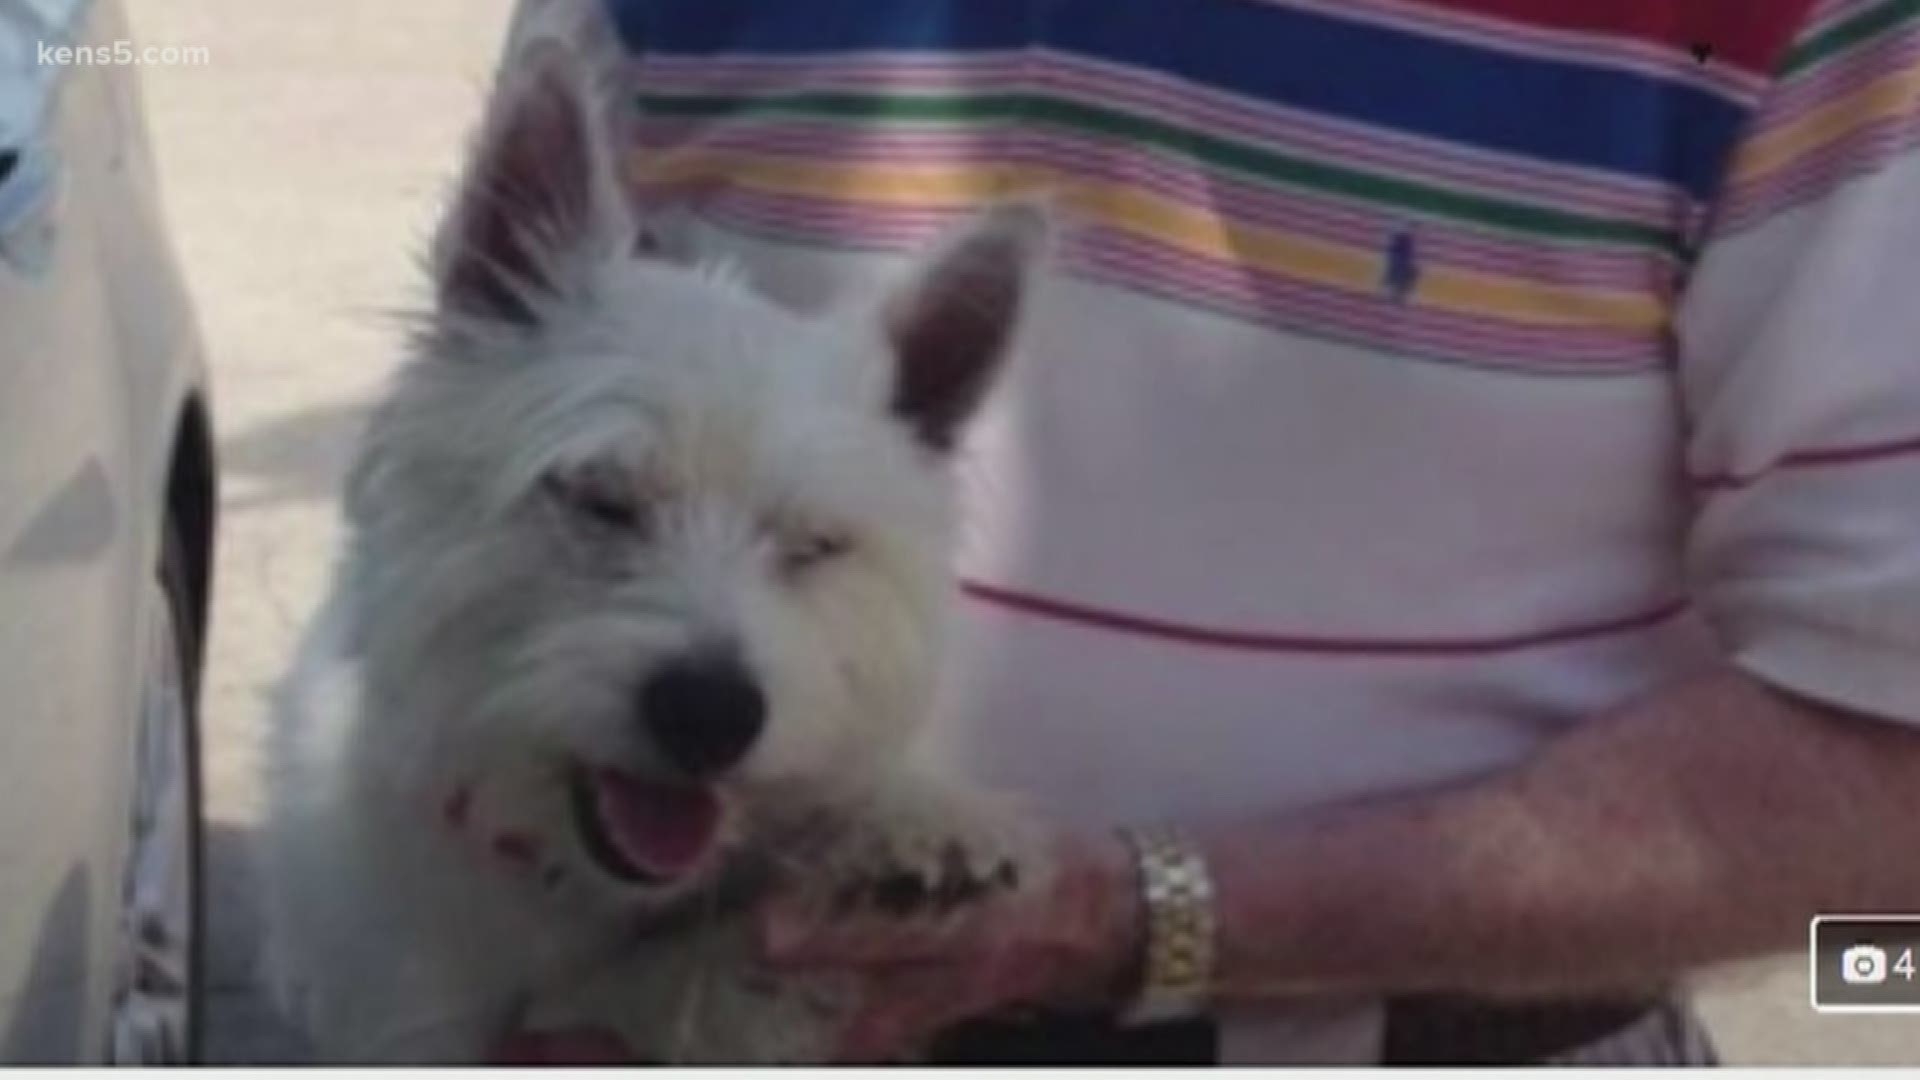 James Martin says his adopted Westie, Olaf, got out of the house and eventually ended up with the rescue he adopted the dog from, but they say won't give the dog back.